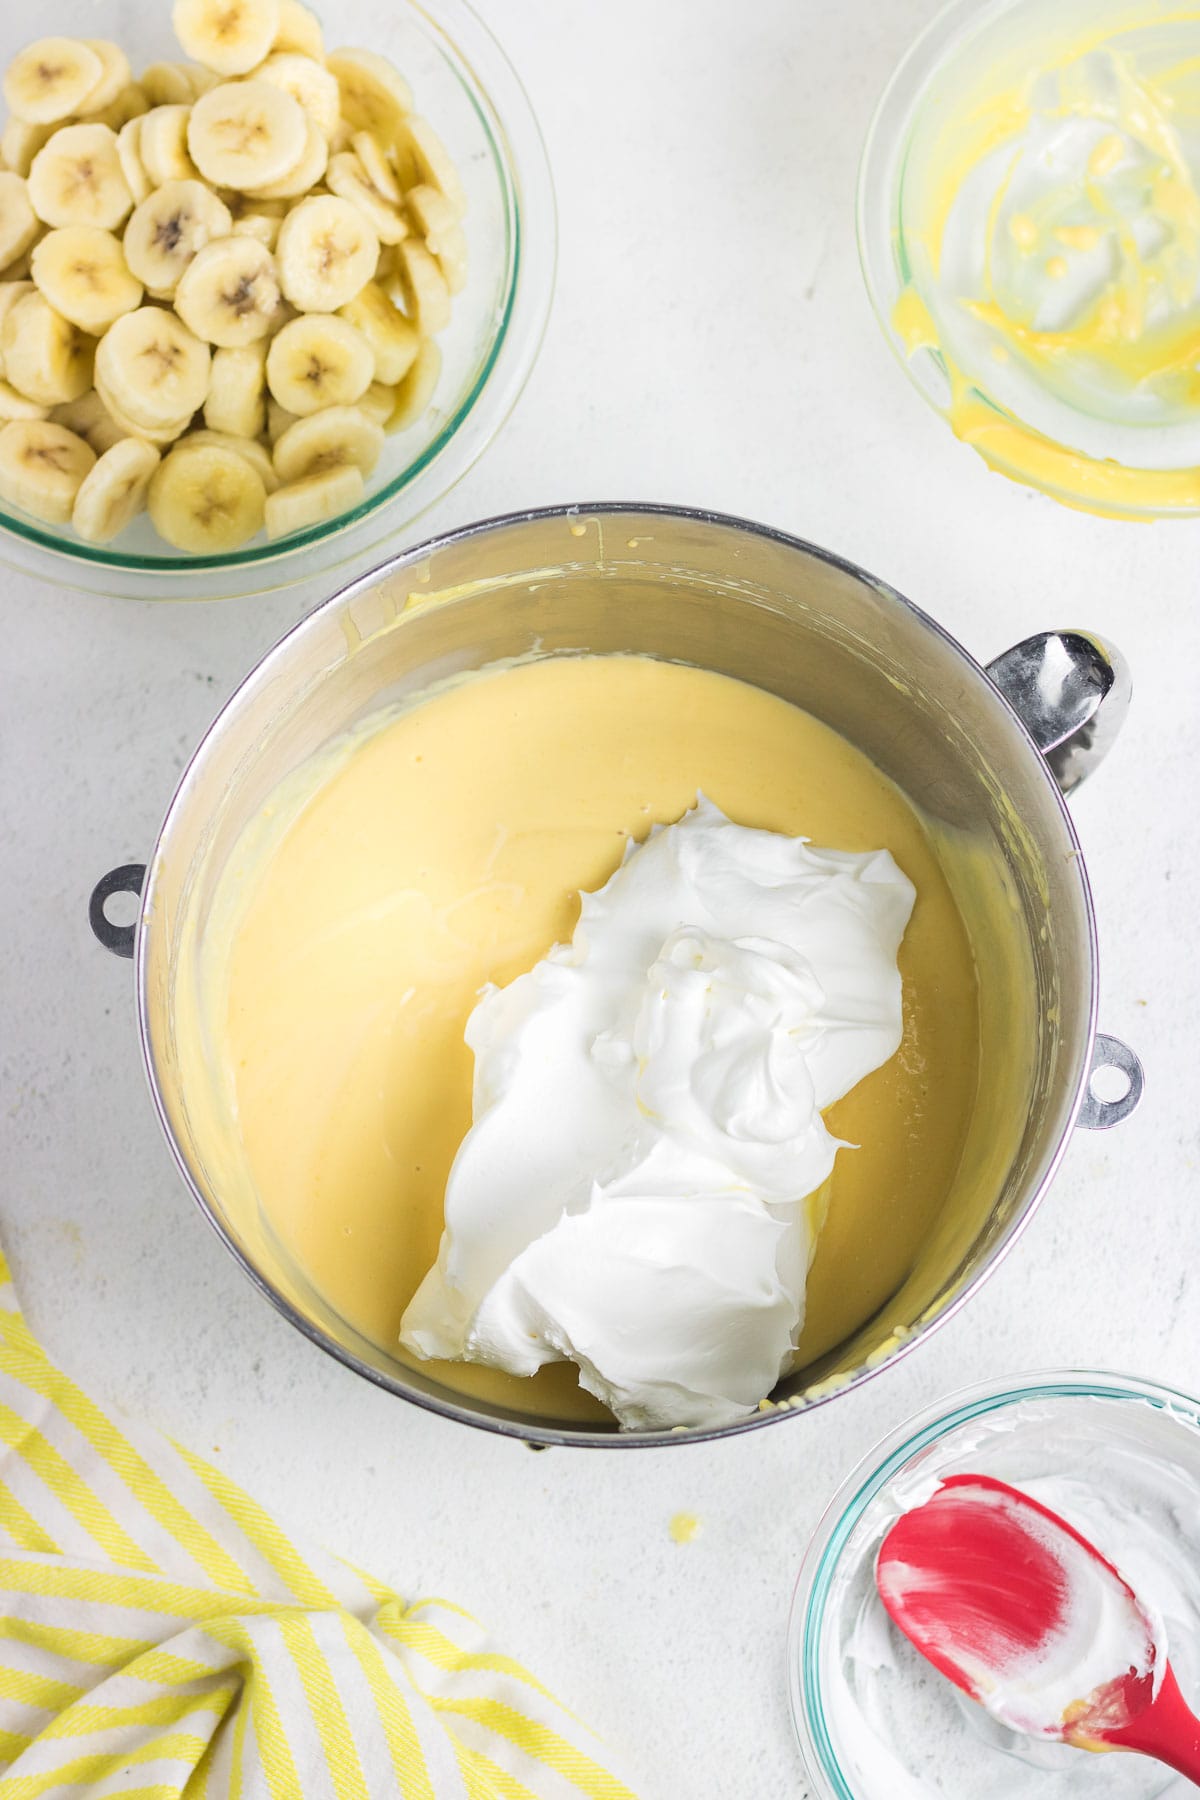 The pudding mixture with a scoop of whipped topping to be mixed together.